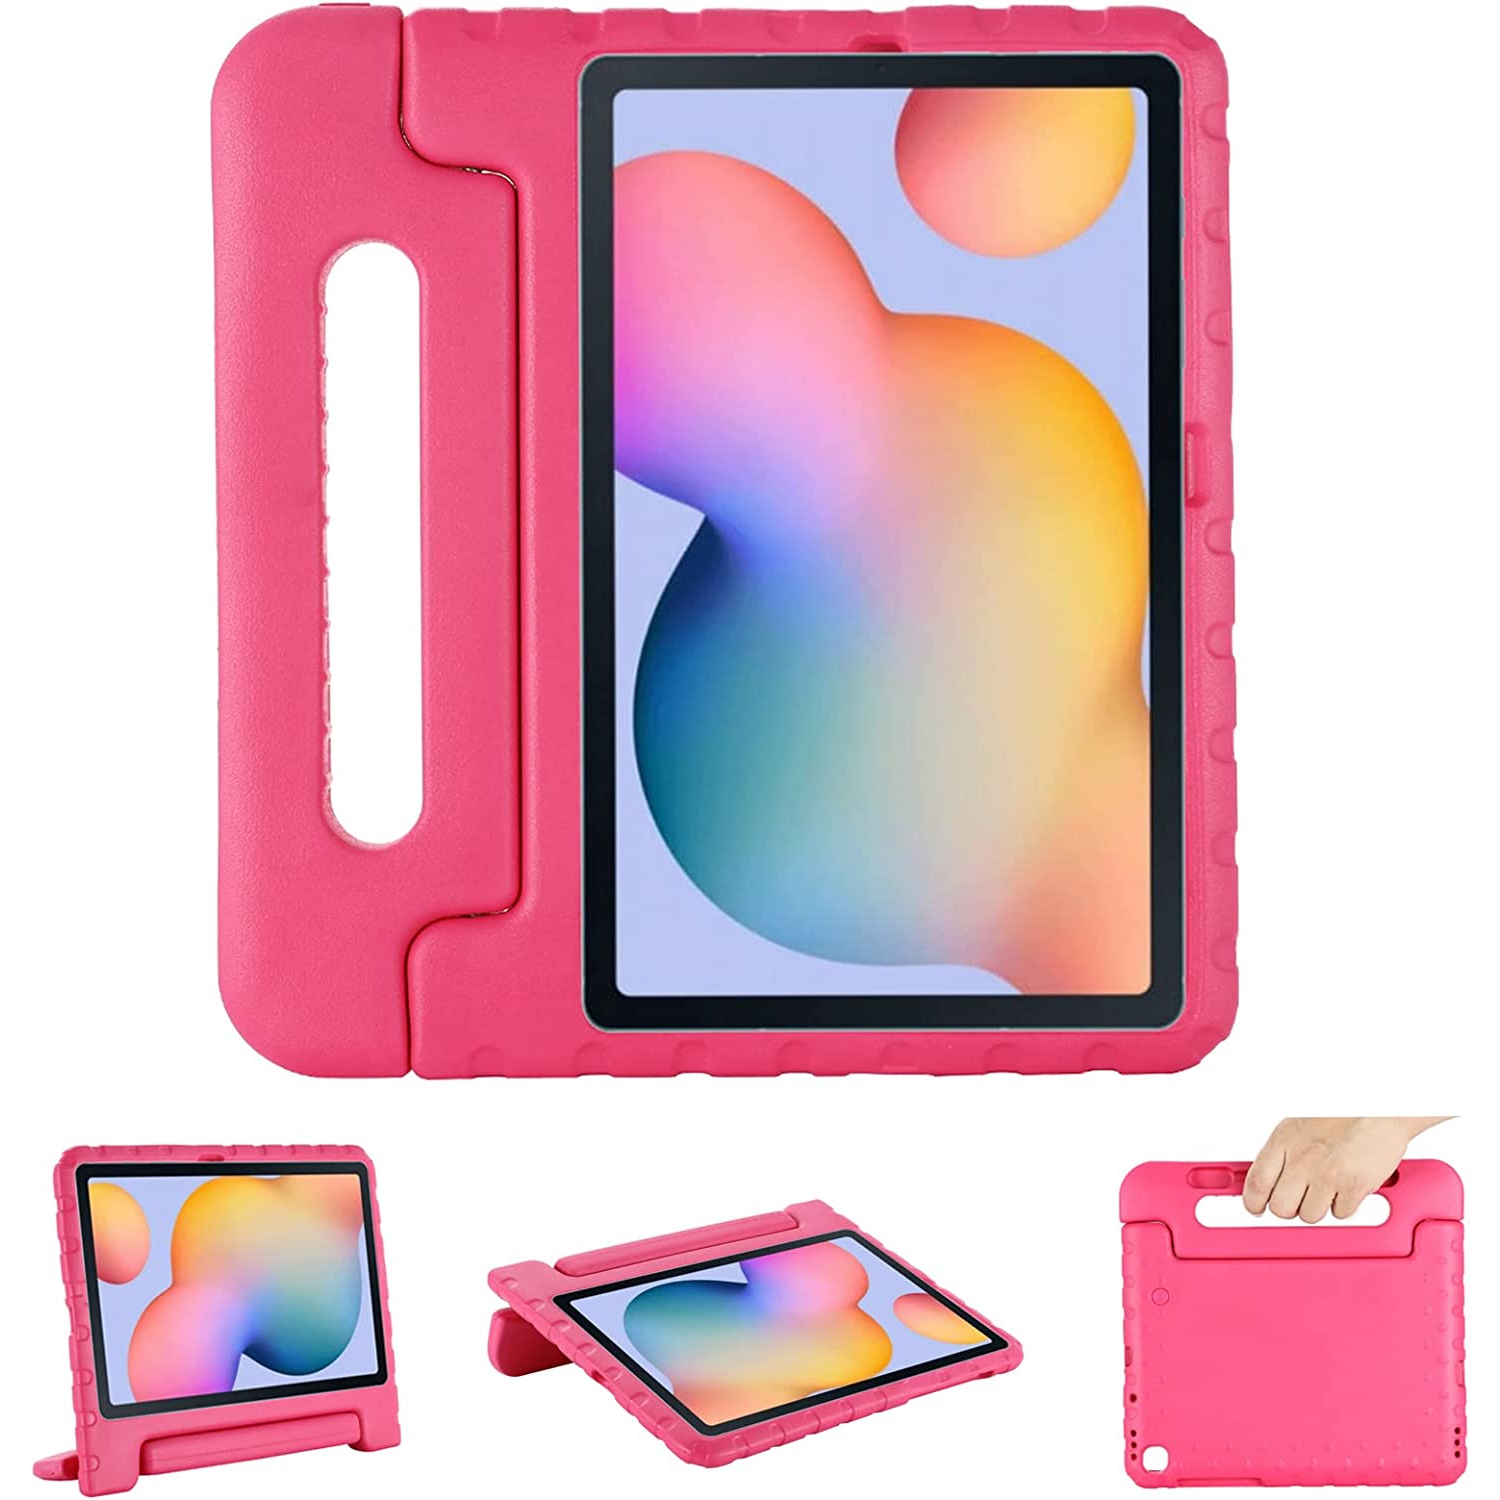 F Shockproof Case for Samsung Galaxy Tab S6 Lite 10.4 inch 2022/2020 Model (SM-P610/P613/P615/P619), Lightweight Stand Handle Kids Case with Pencil Holder for Galaxy Tab S6 Lite 10